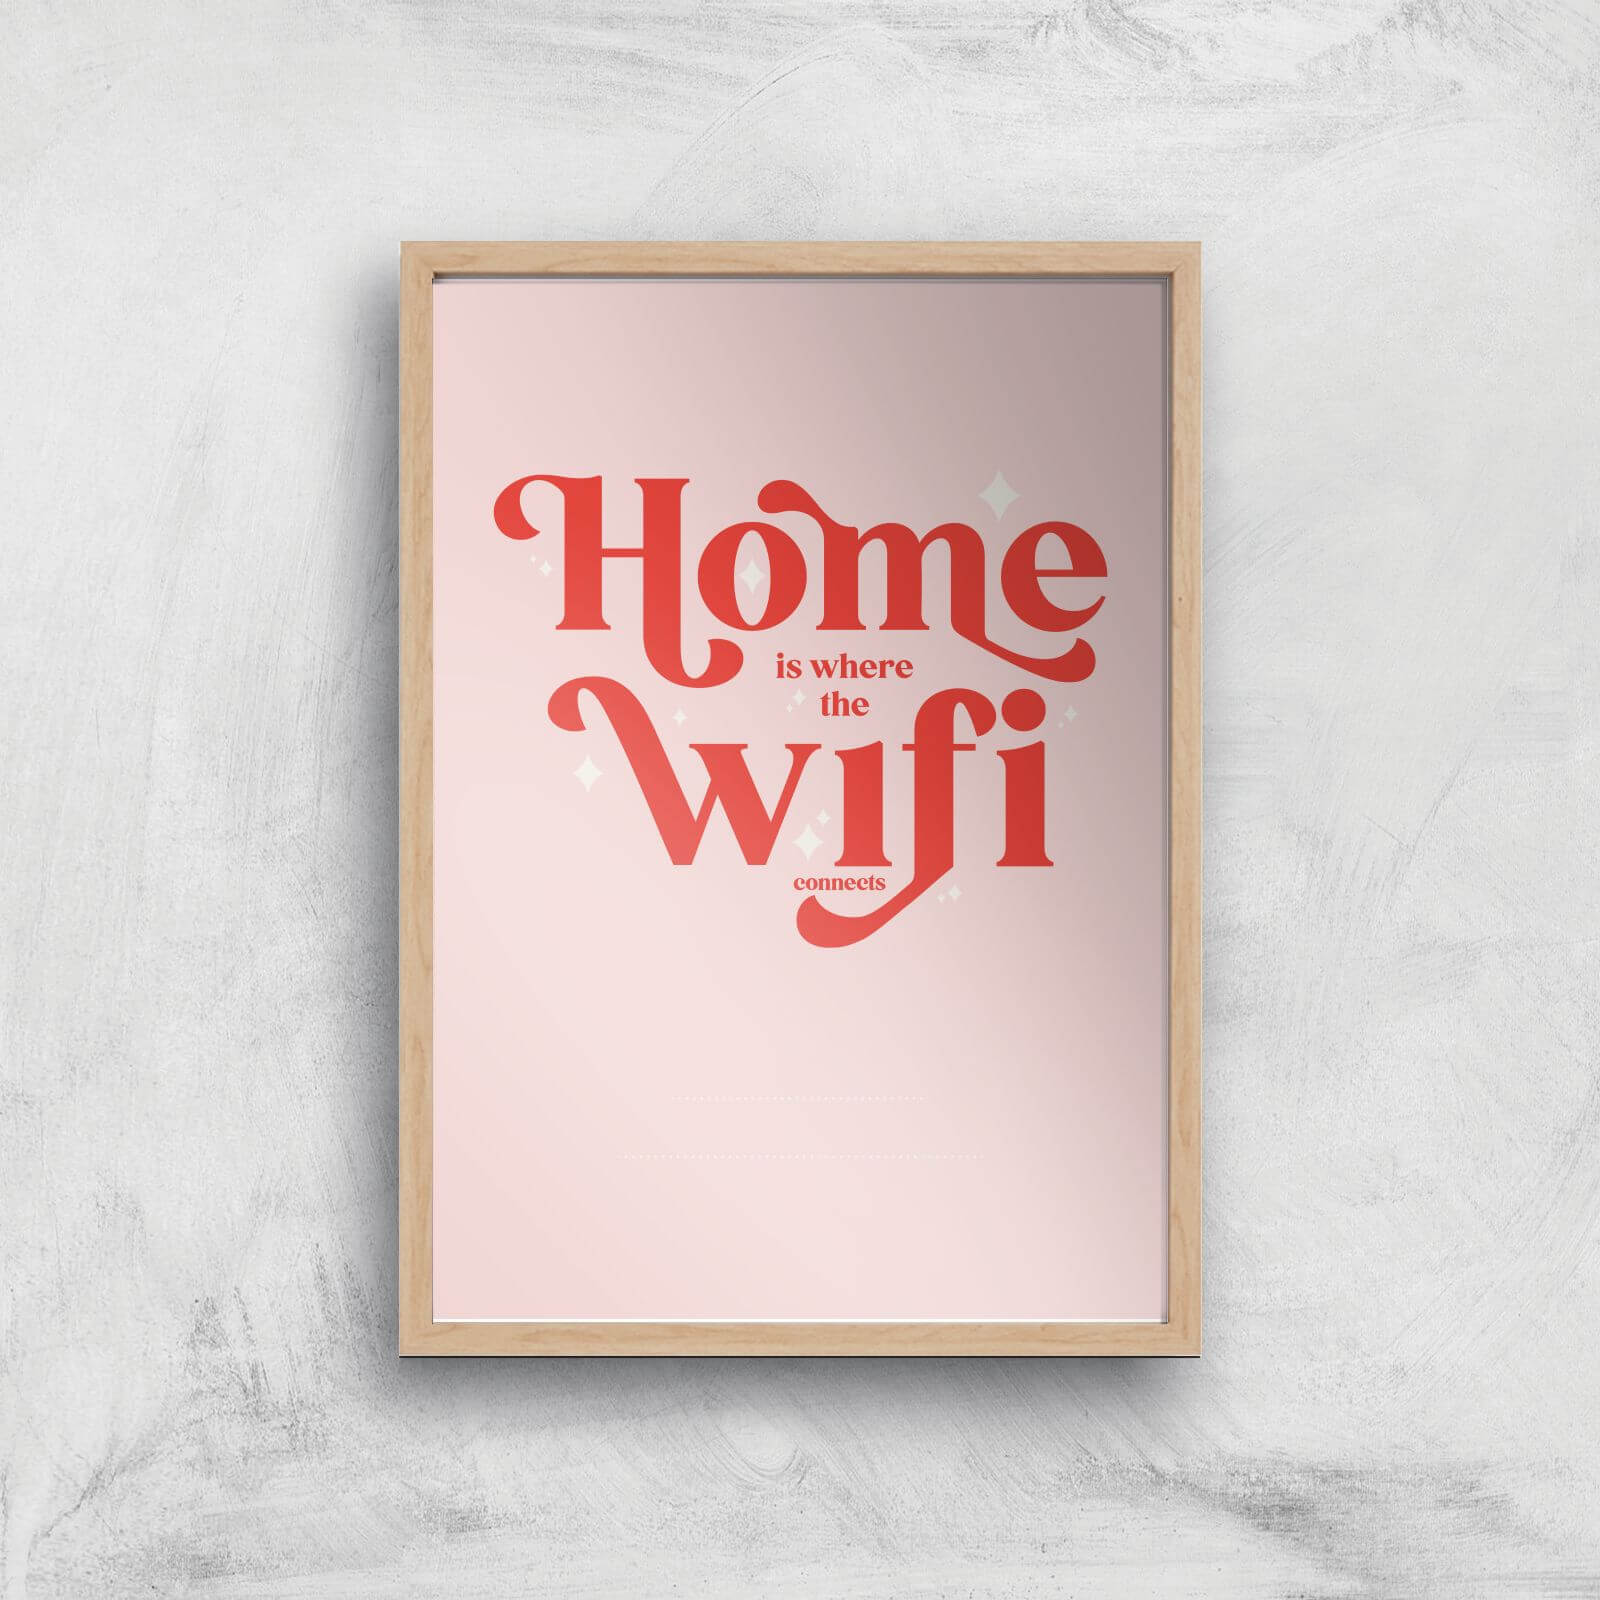 Hermione Chantal Light Home Is Where The Wifi Is Giclee Art Print - A3 - Wooden Frame